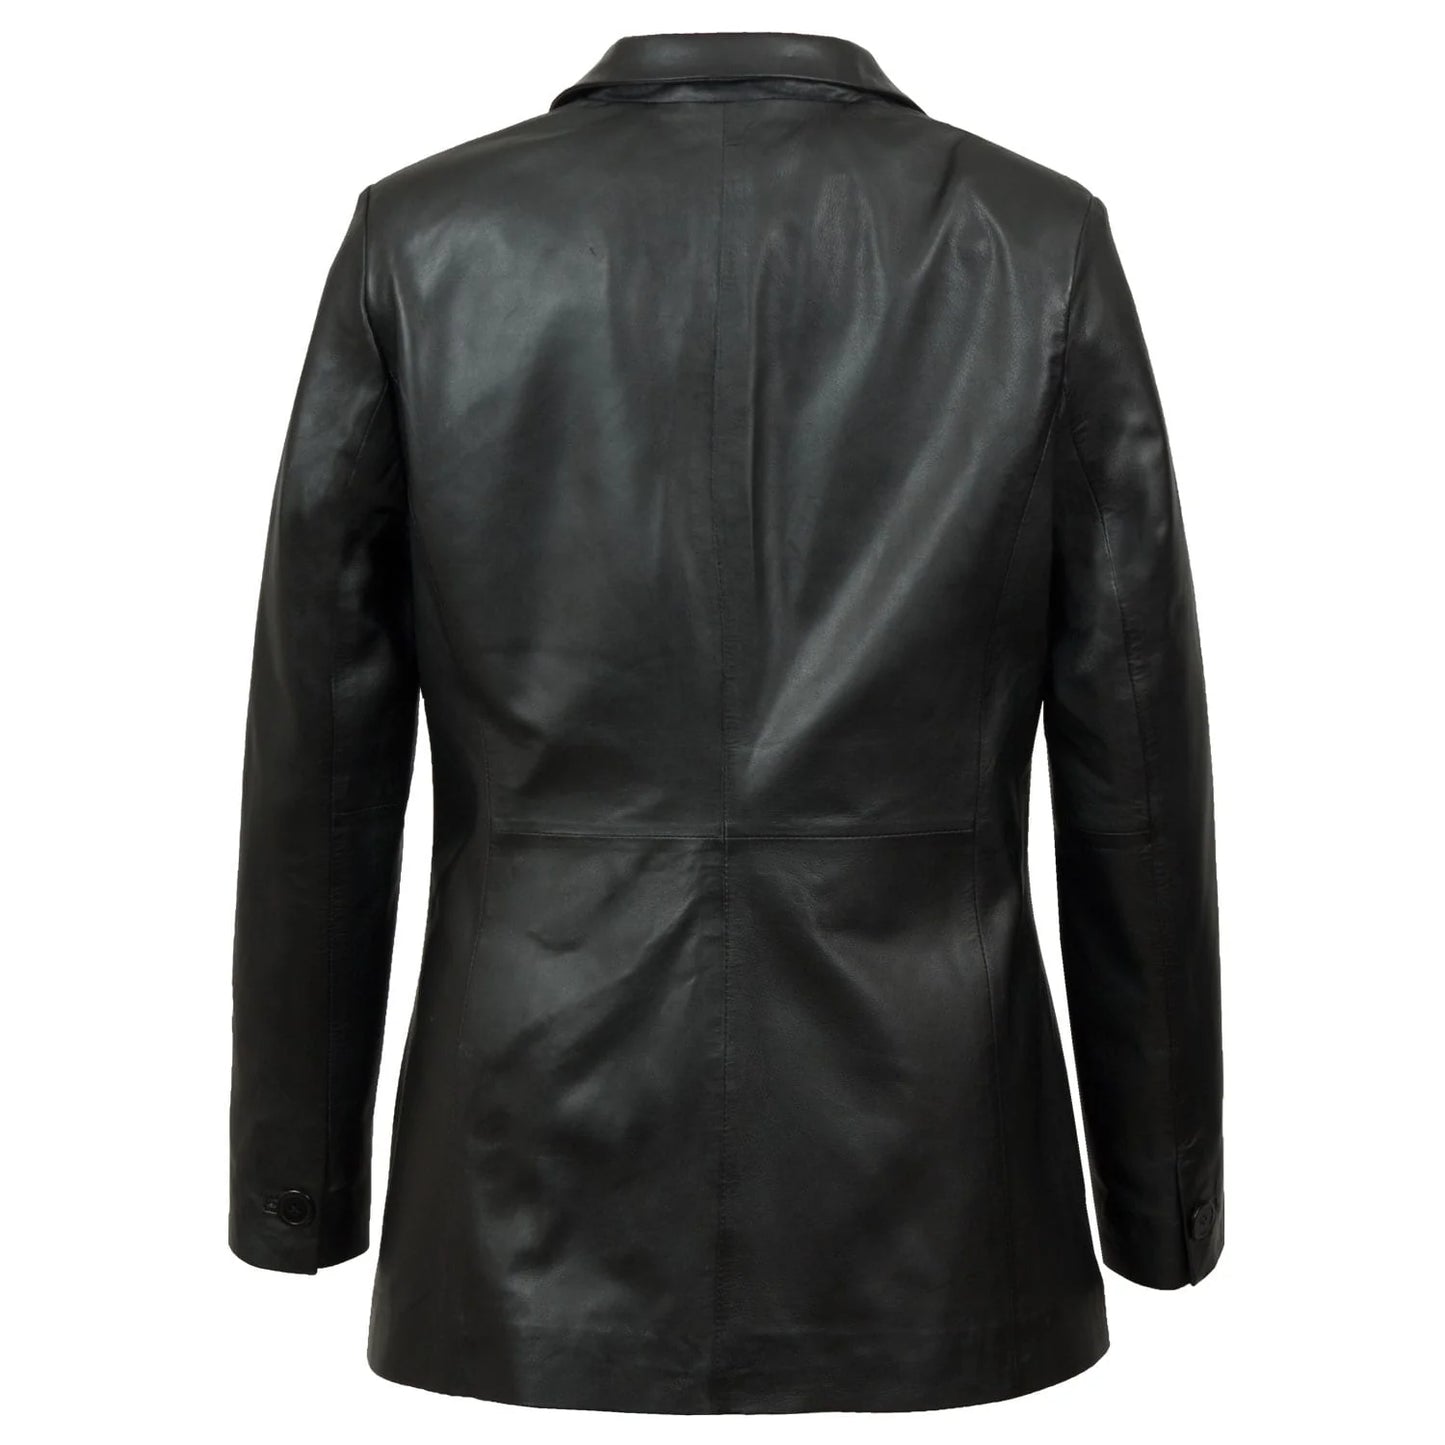 Fitted Leather Blazer Women Black